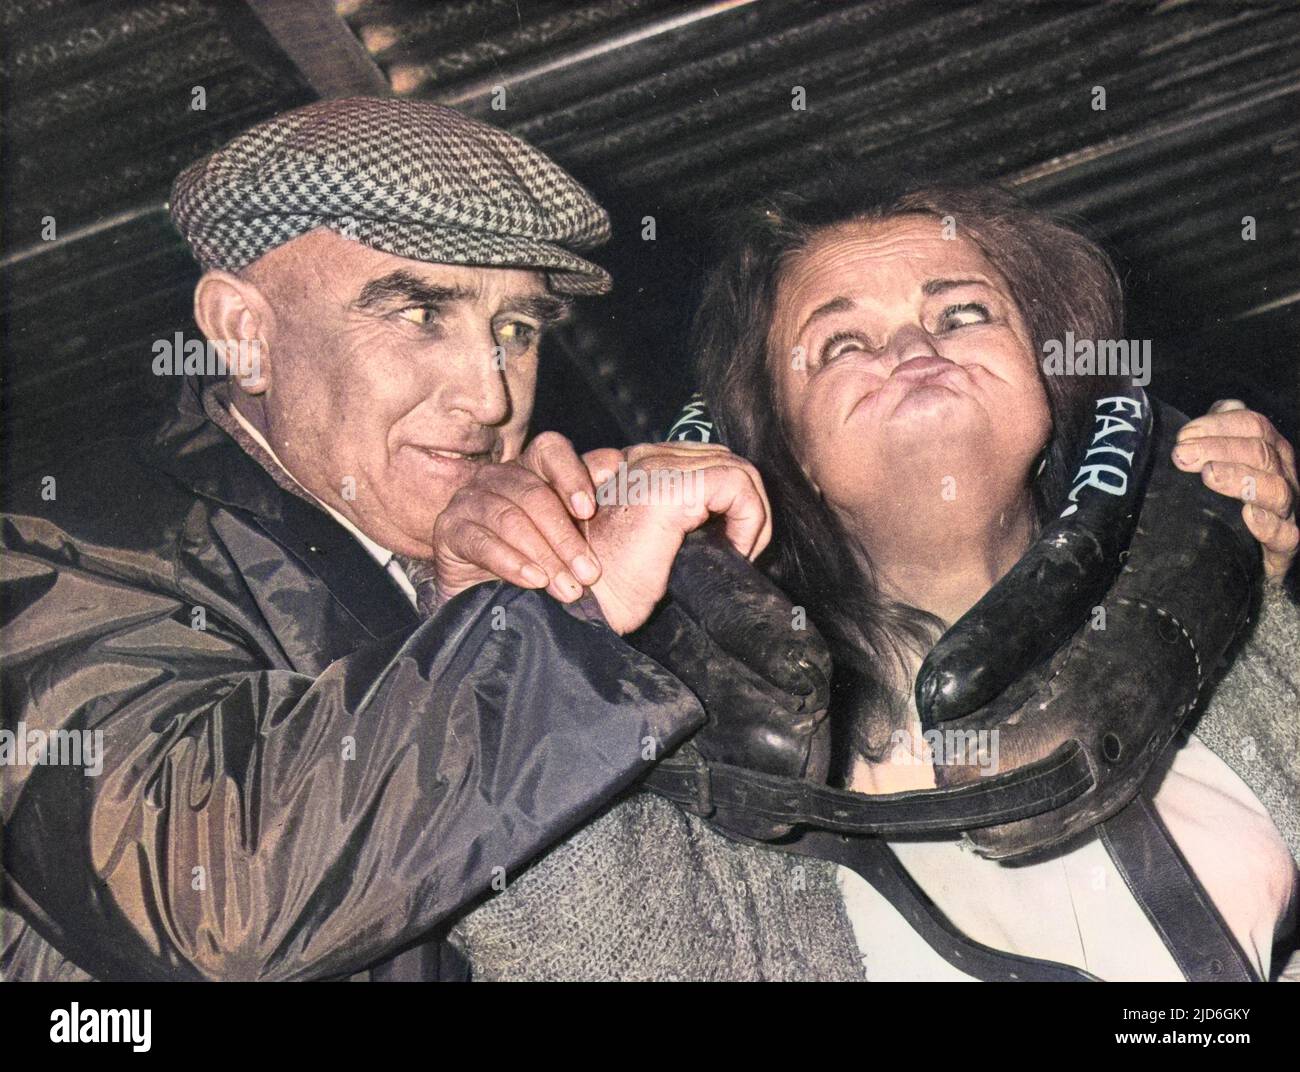 A woman gurner pulls a truely awful face through a leather ring during the gurning contest at Egremont Crab Fair, Whitehaven, Cumbria, England. Colourised version of : 10185601       Date: 1980s Stock Photo